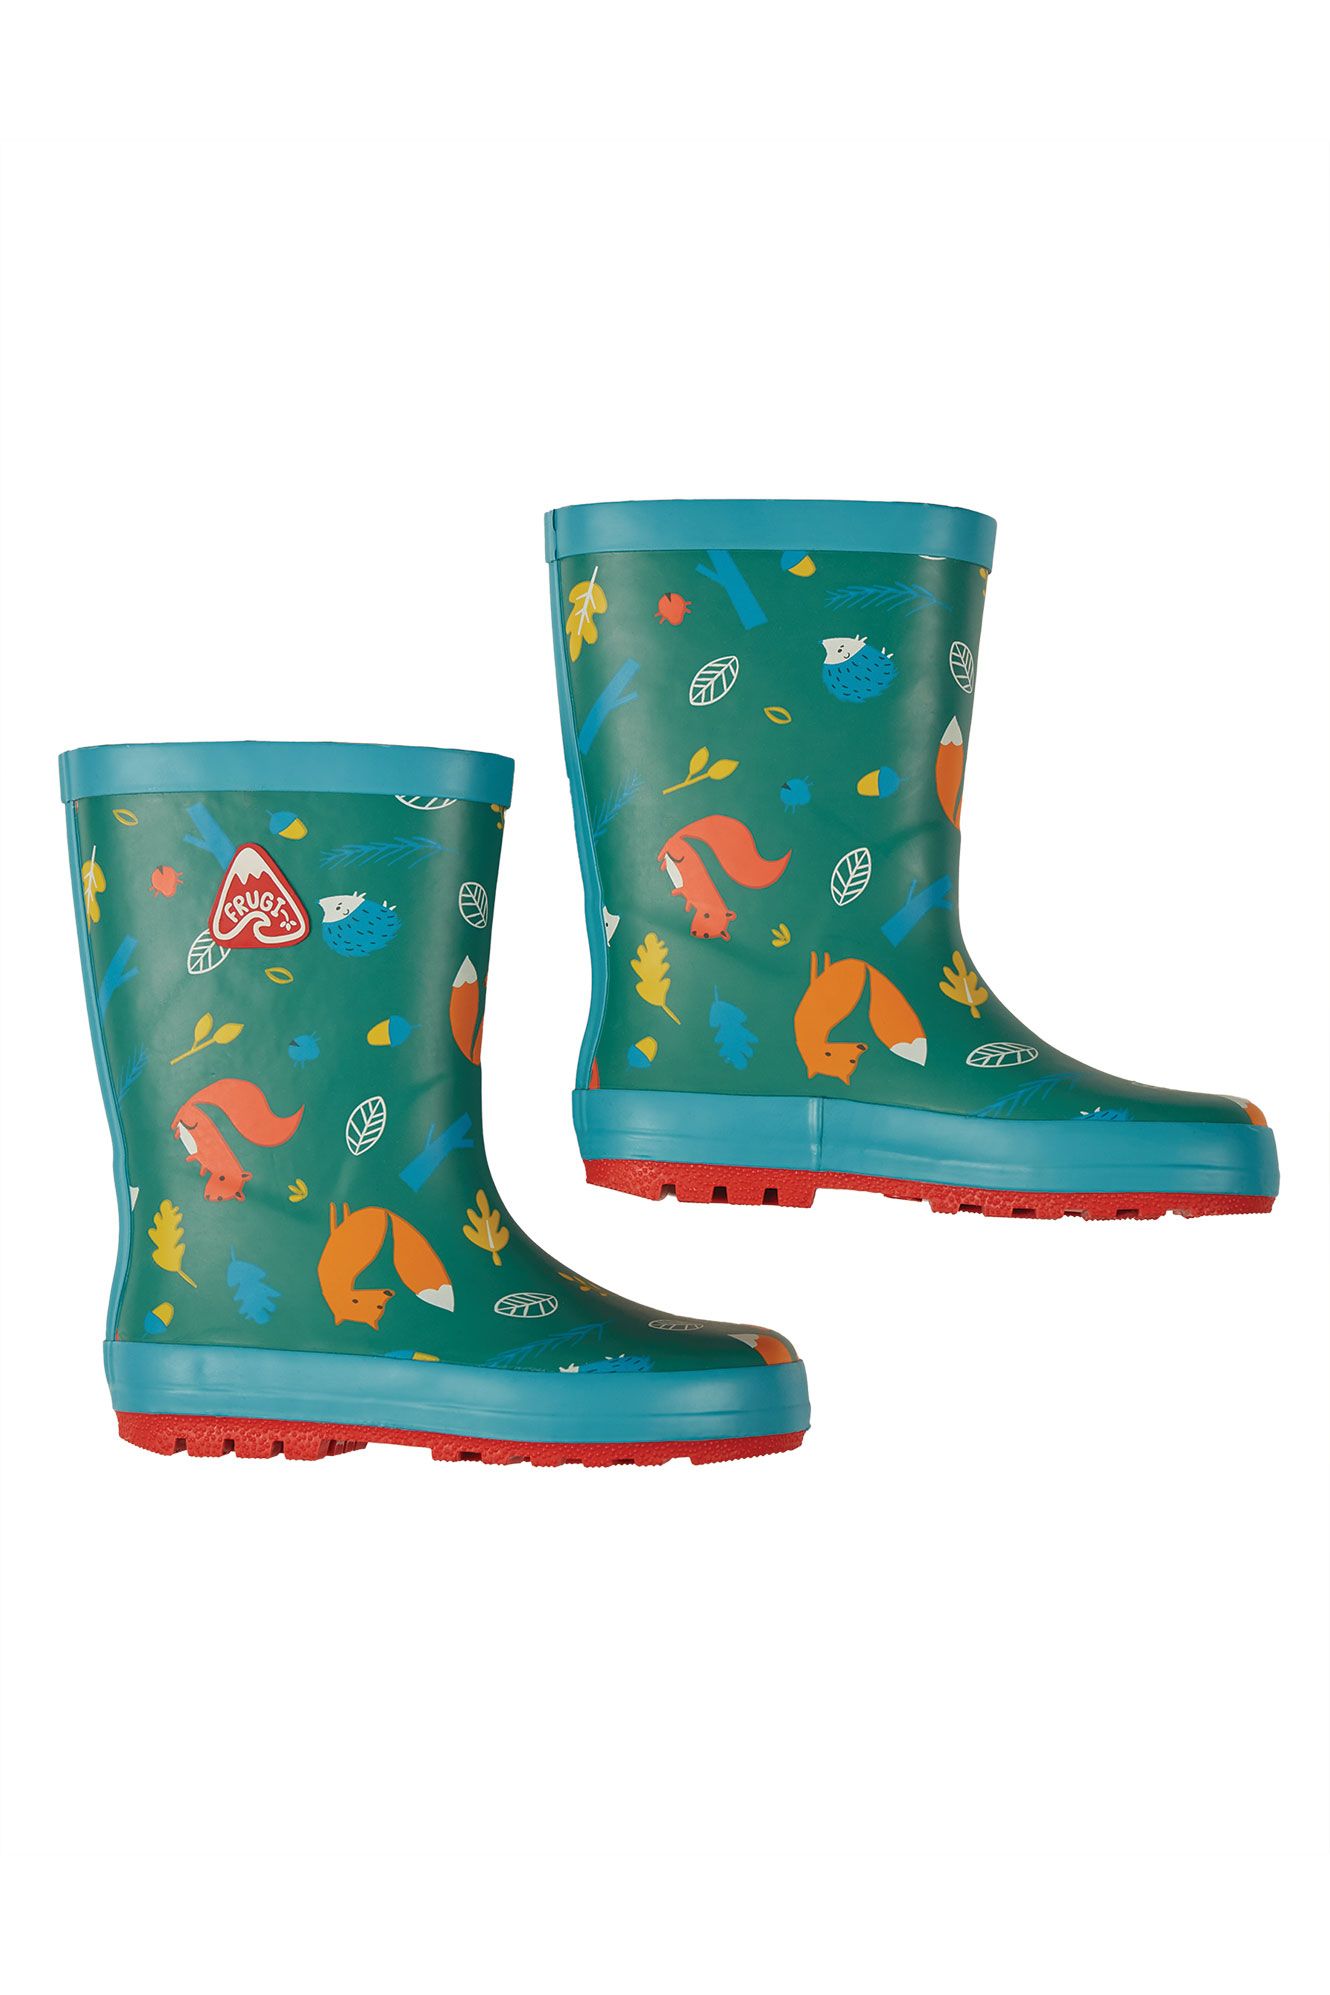 The National Trust Puddle Buster Welly